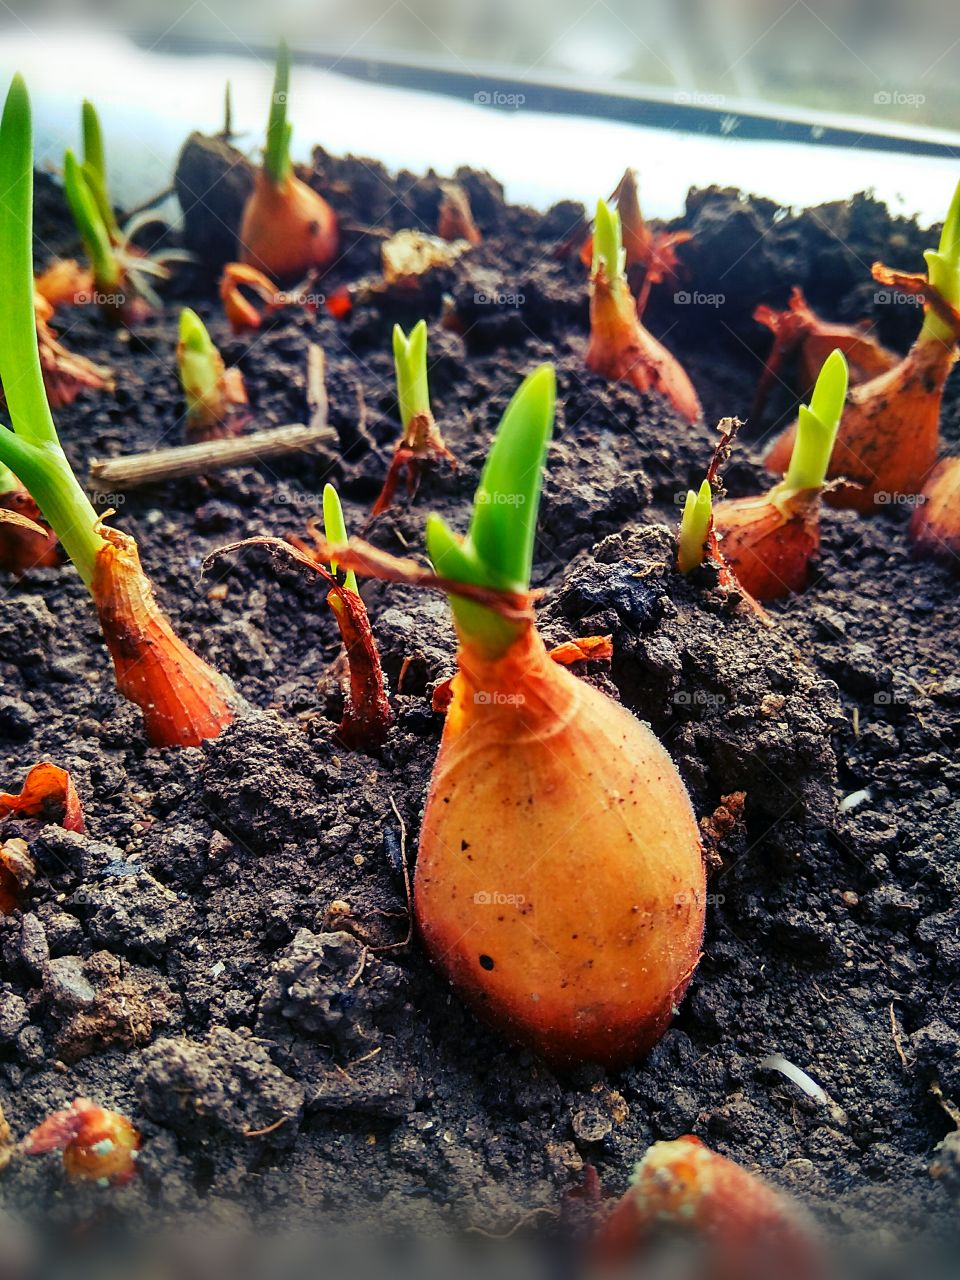 first signs of sрring by foaр missions, growing the first leaves of the onion in the early spring!